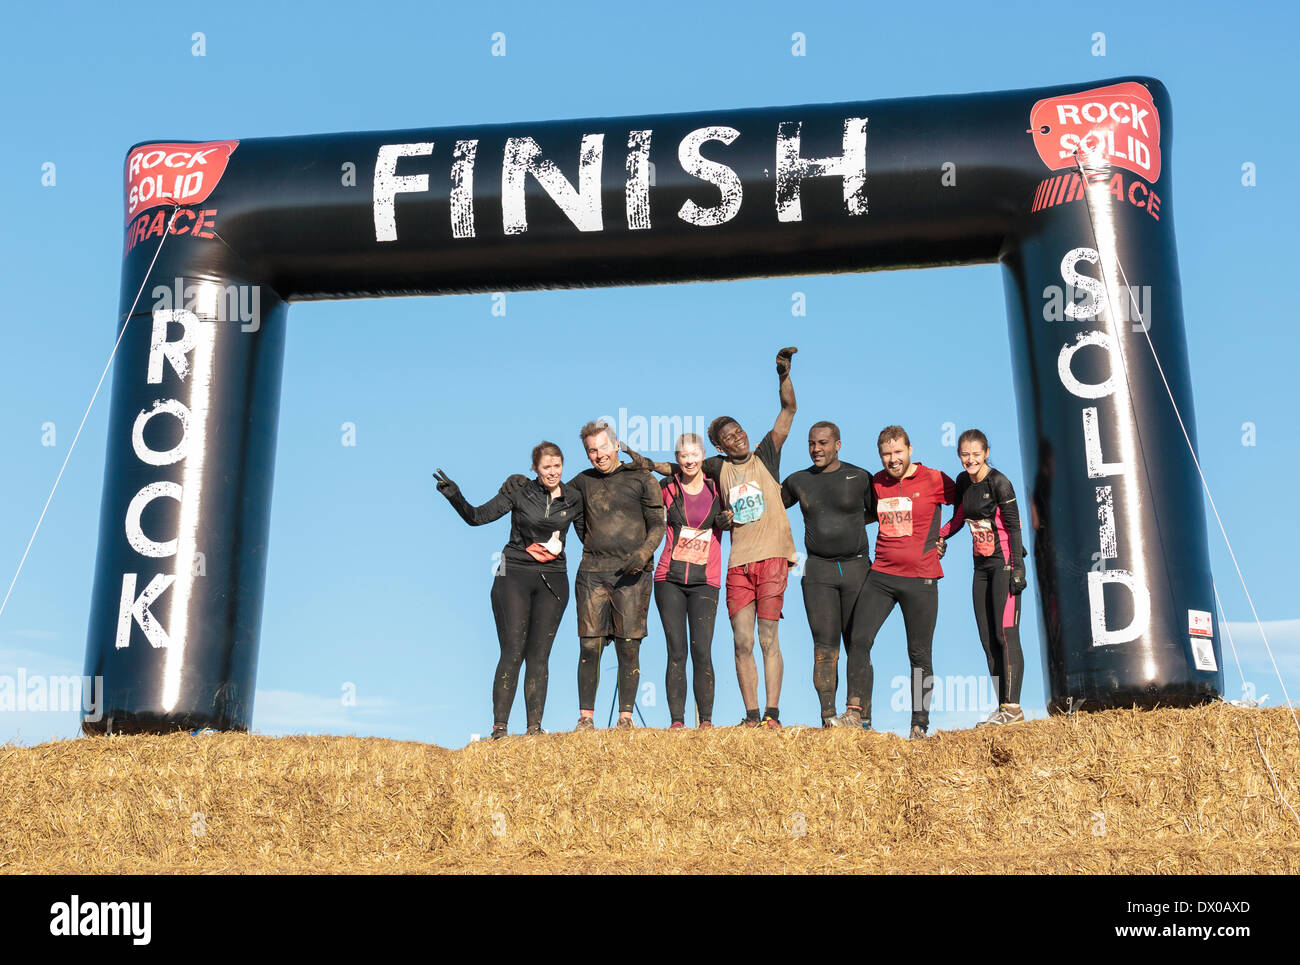 A team of friends pose for a photograph at the finish line an obstacle course at Escot Park near Exeter Devon on March 15, 2014. Over 3,500 entrants entered the event which promotes fitness and team spirit. Stock Photo